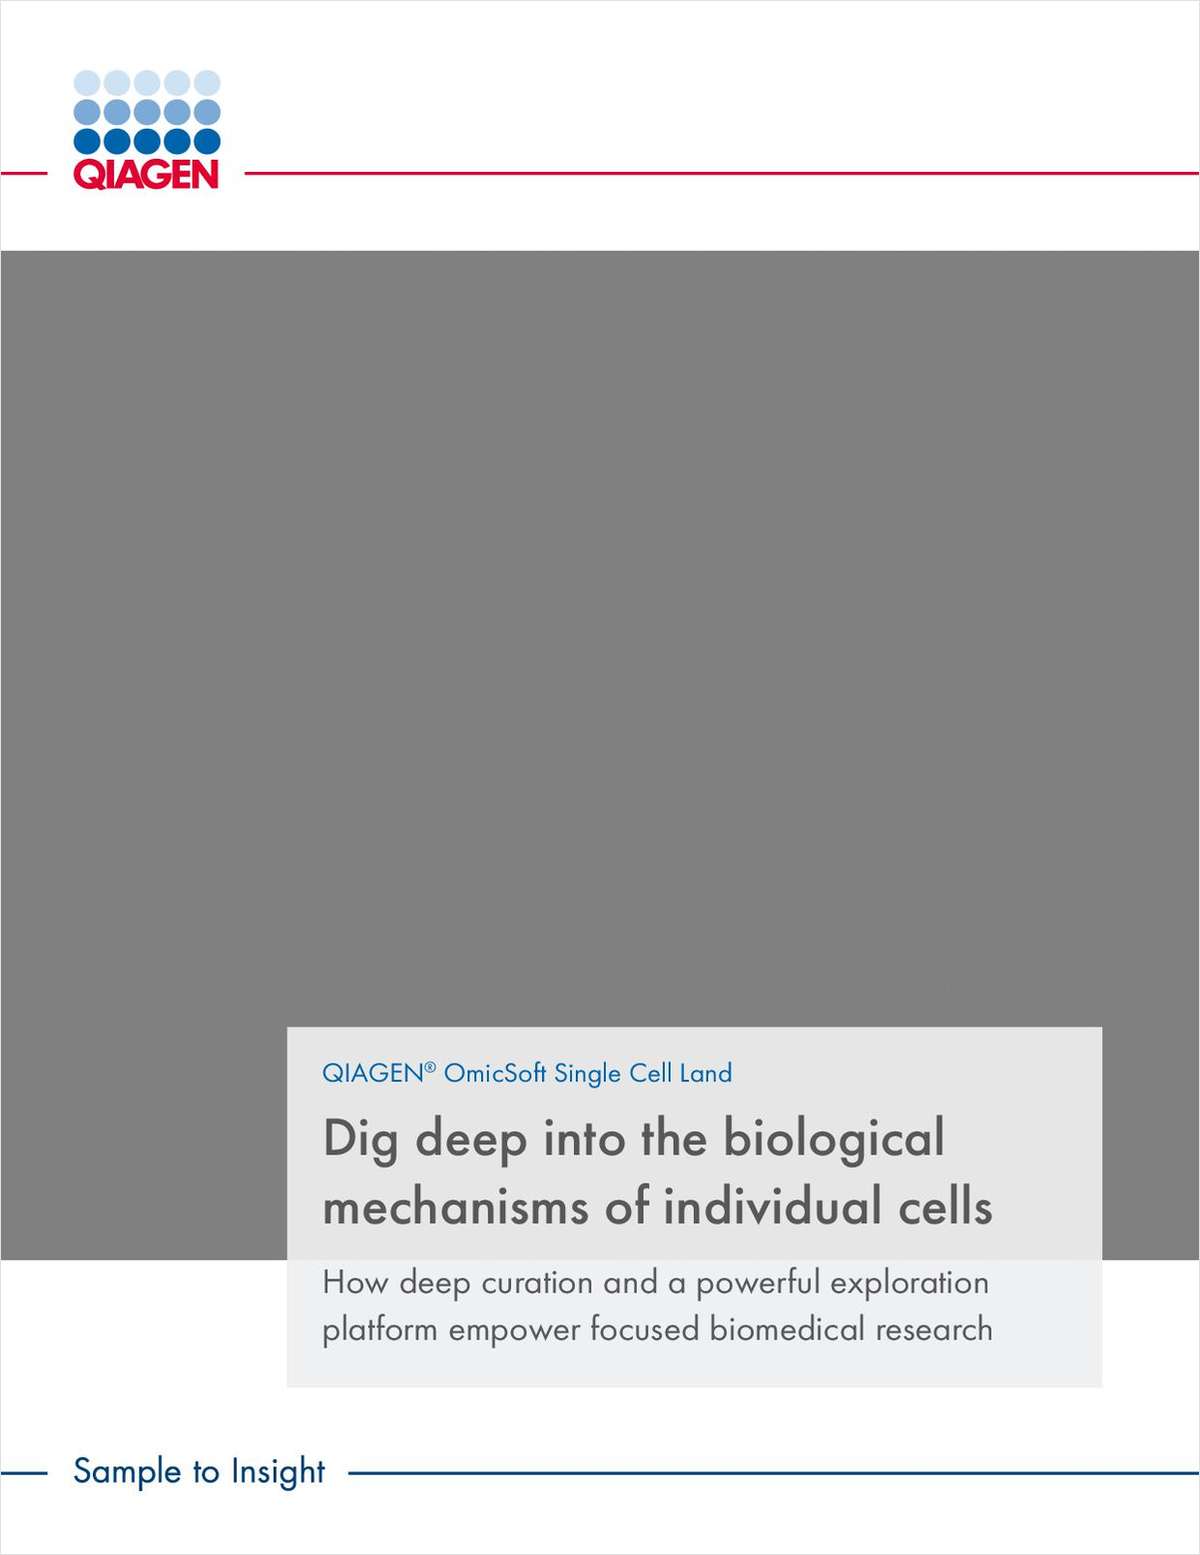 Dig Deep into the Biological Mechanisms of Individual Cells